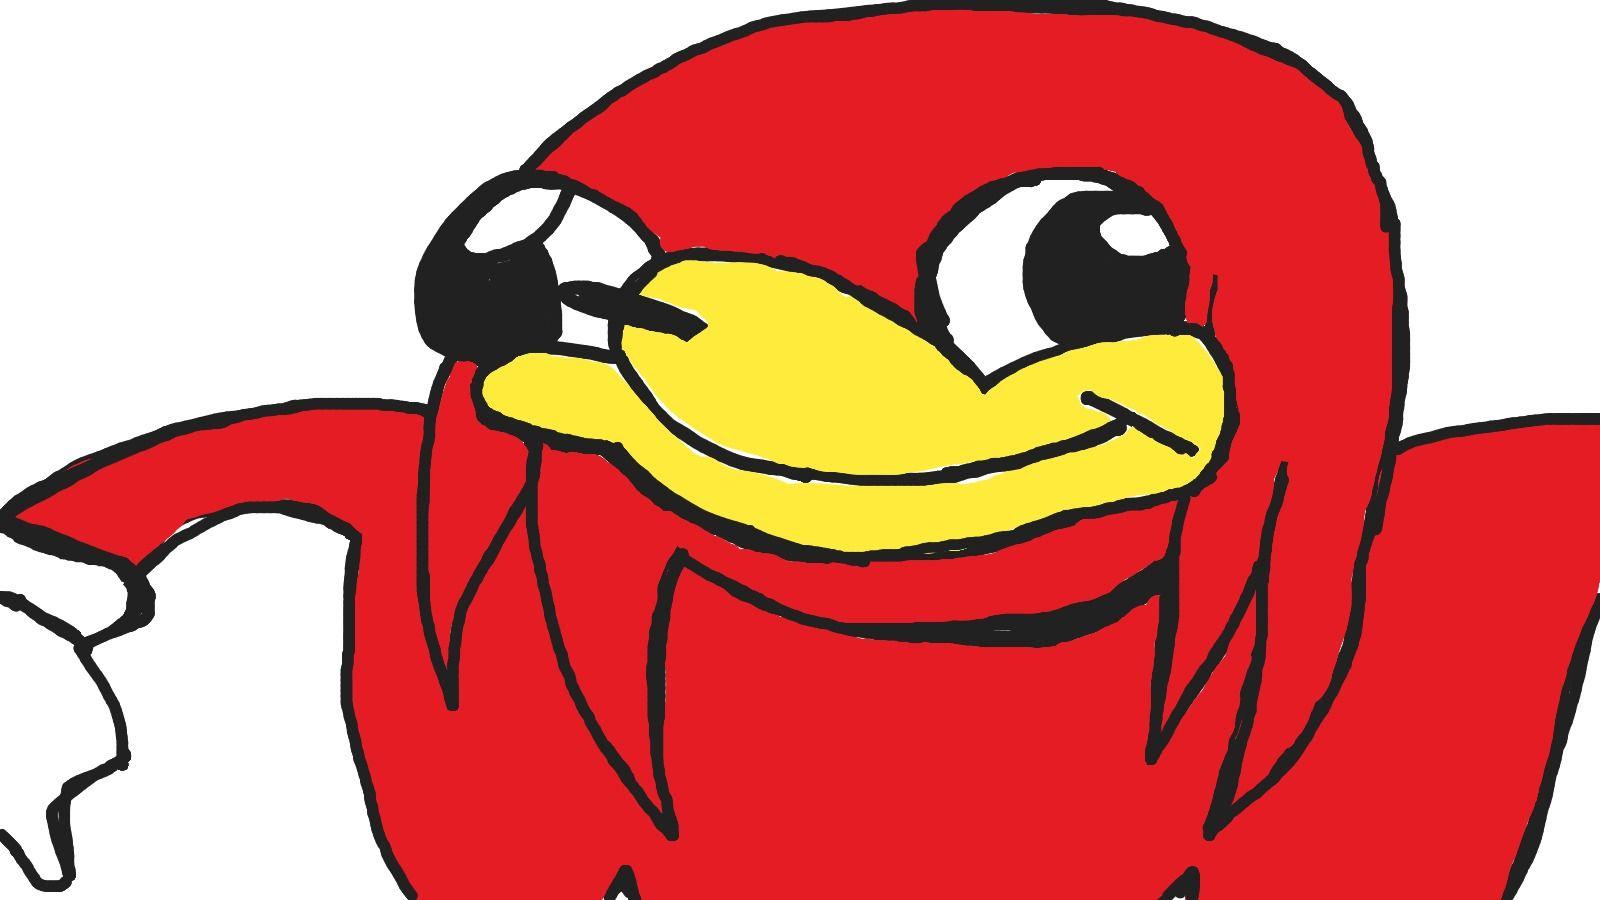 My 9 years old brother just draw Knuckles. Ugandan Knuckles. Know